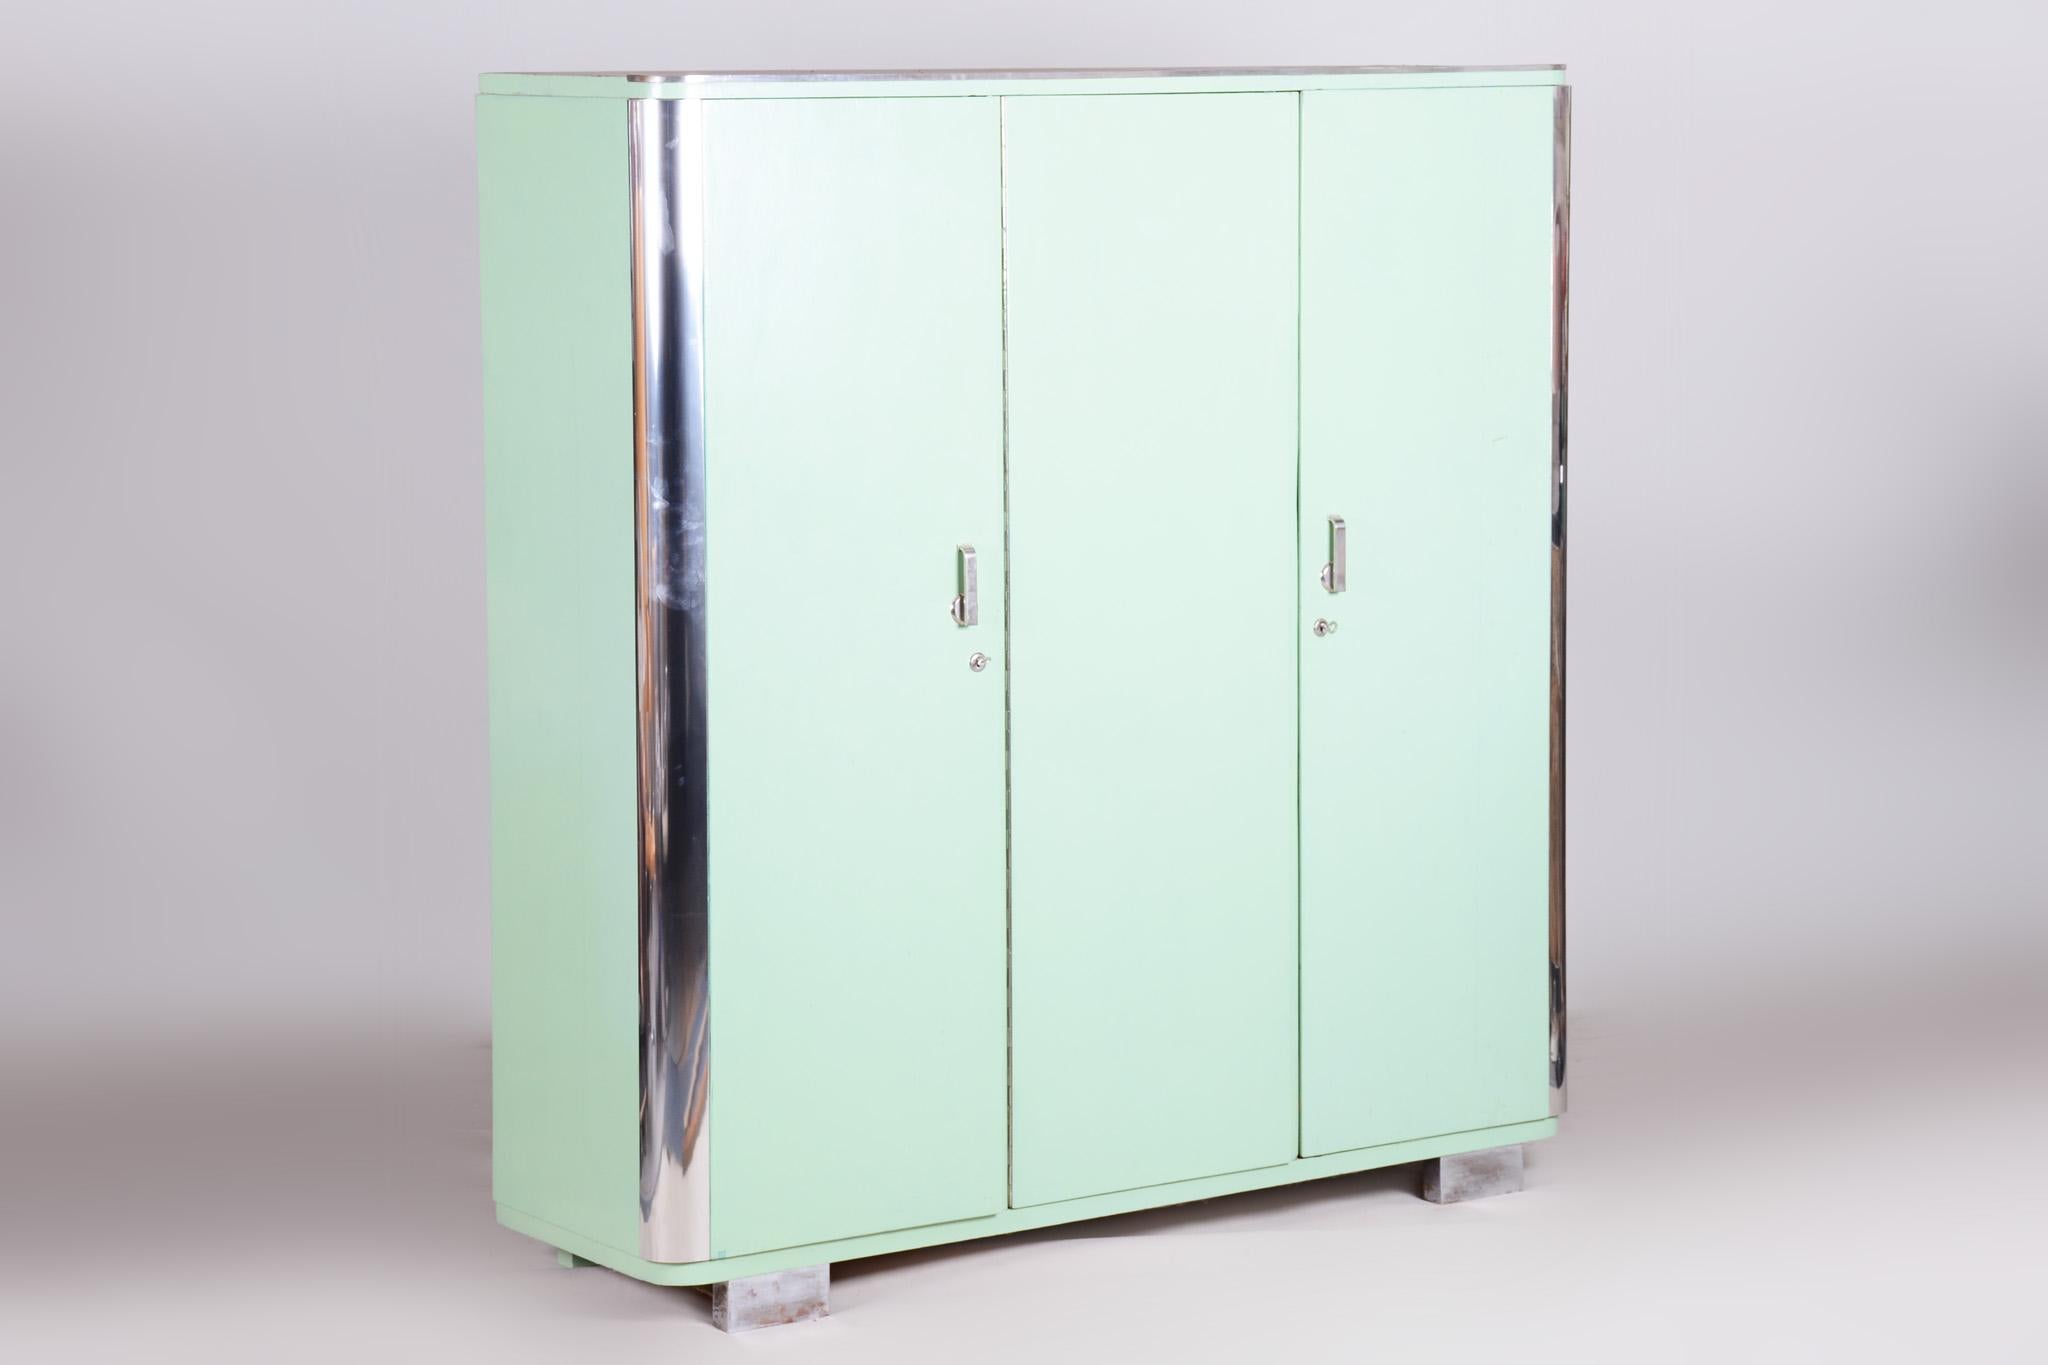 Green Bauhaus Wardrobe Made in 1930s Czechia by Vichr a Spol, Fully Restored 12